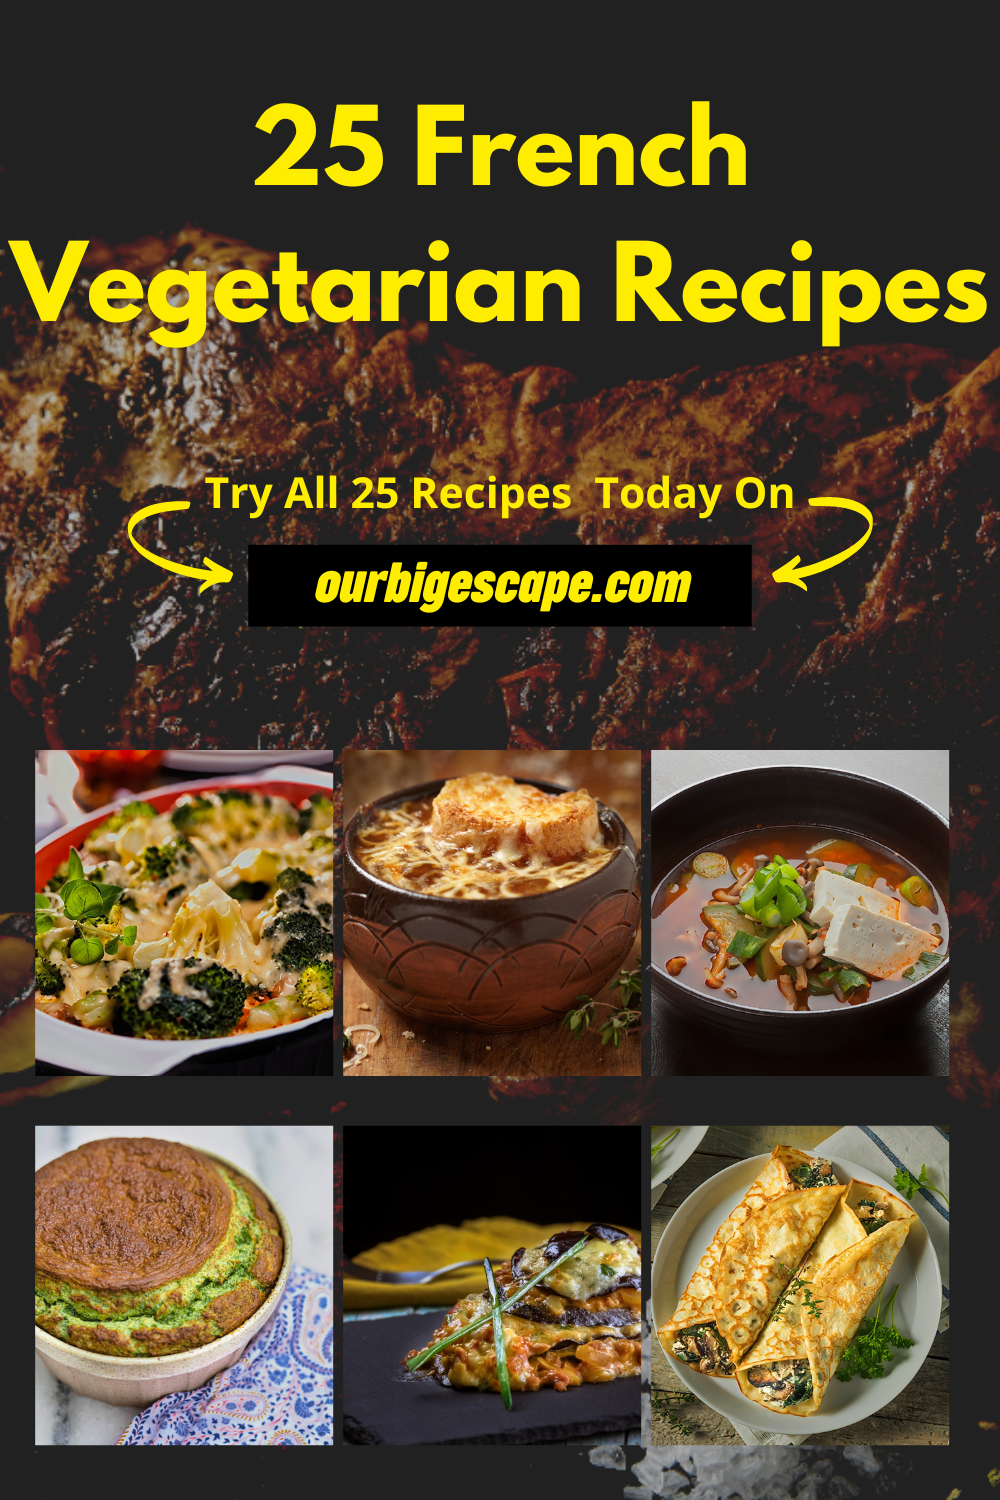 25 French Vegetarian Recipes (5)